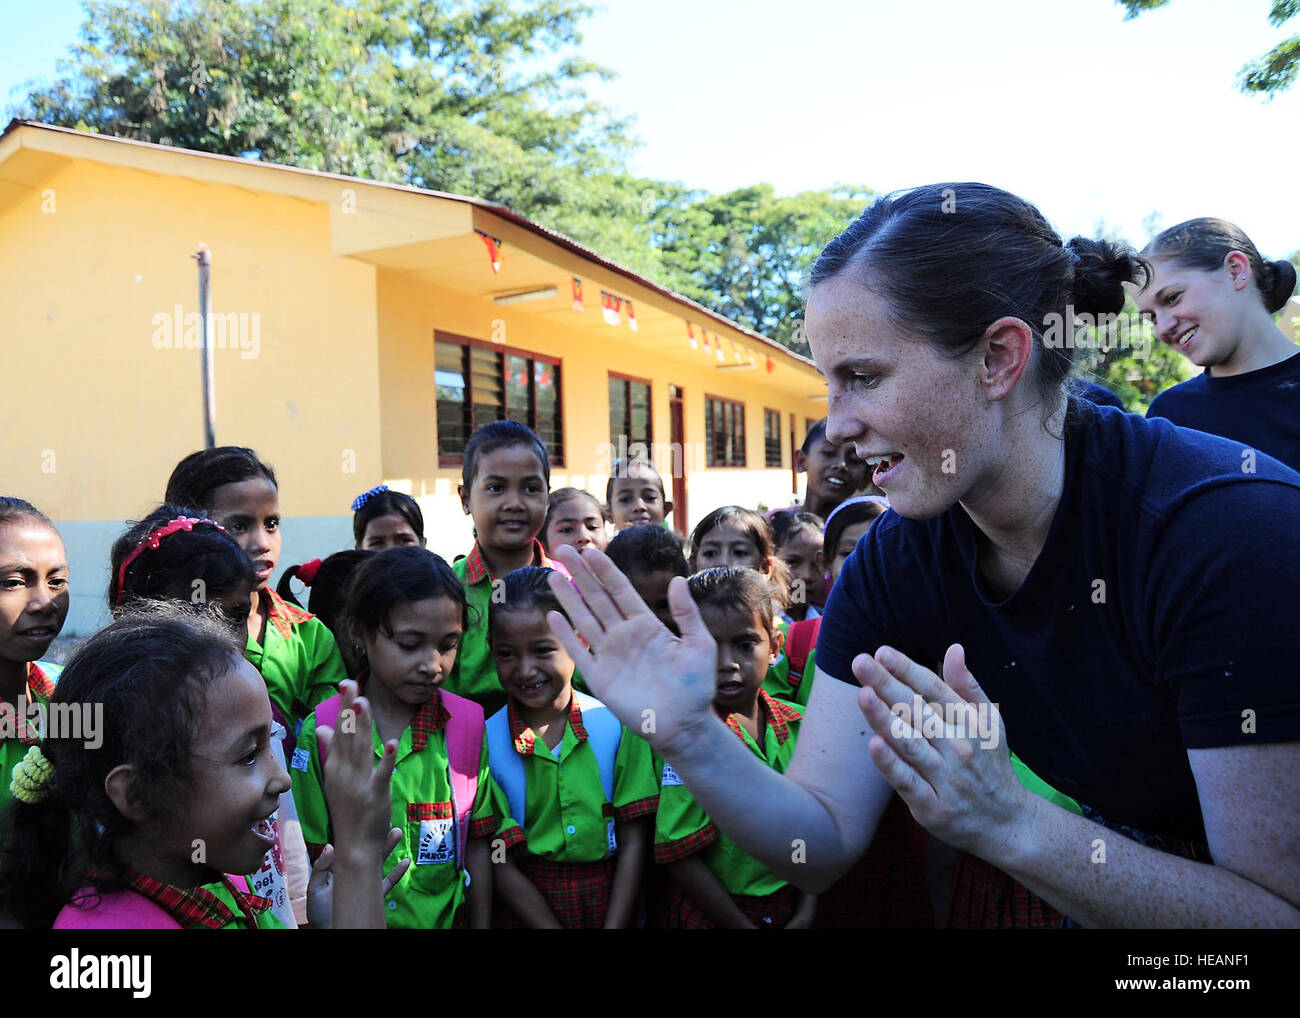 Ensign Allison Luzwick claps hands with a Timorese girl at Farol Primary School during a community service event for the Timor-Leste phase of Pacific Partnership 2011. Pacific Partnership is a five-month humanitarian assistance initiative that will make port visits to Tonga, Vanuatu, Papua New Guinea, Timor-Leste and the Federated States of Micronesia. Also pictured is Petty Officer 2nd Class Victoria Kent.  Tech. Sgt. Tony Tolley) Stock Photo